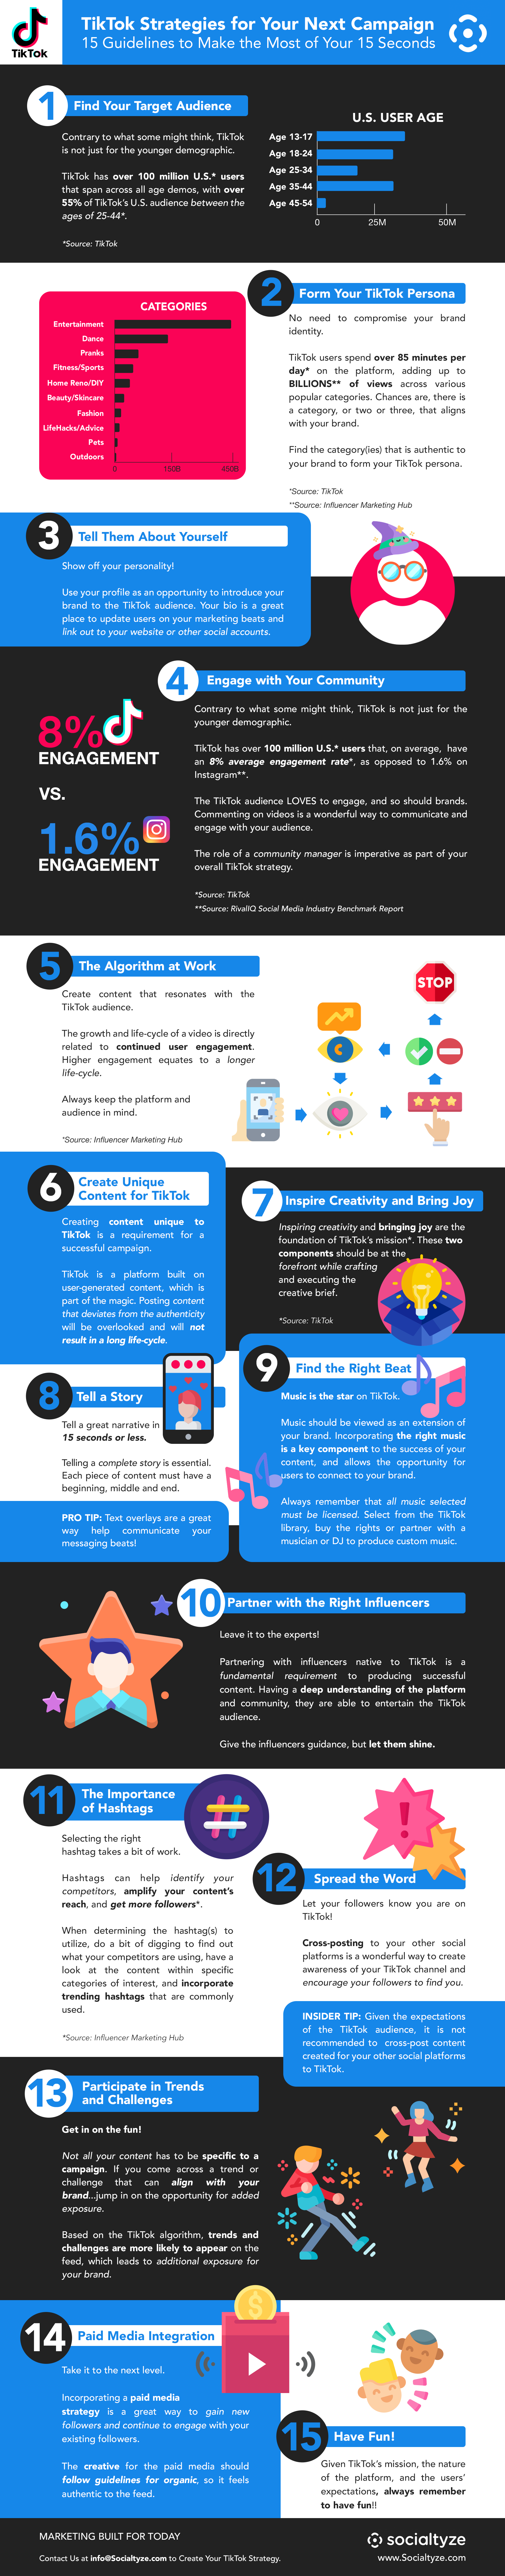 15 tiktok tips to maximize your branded content efforts infographic